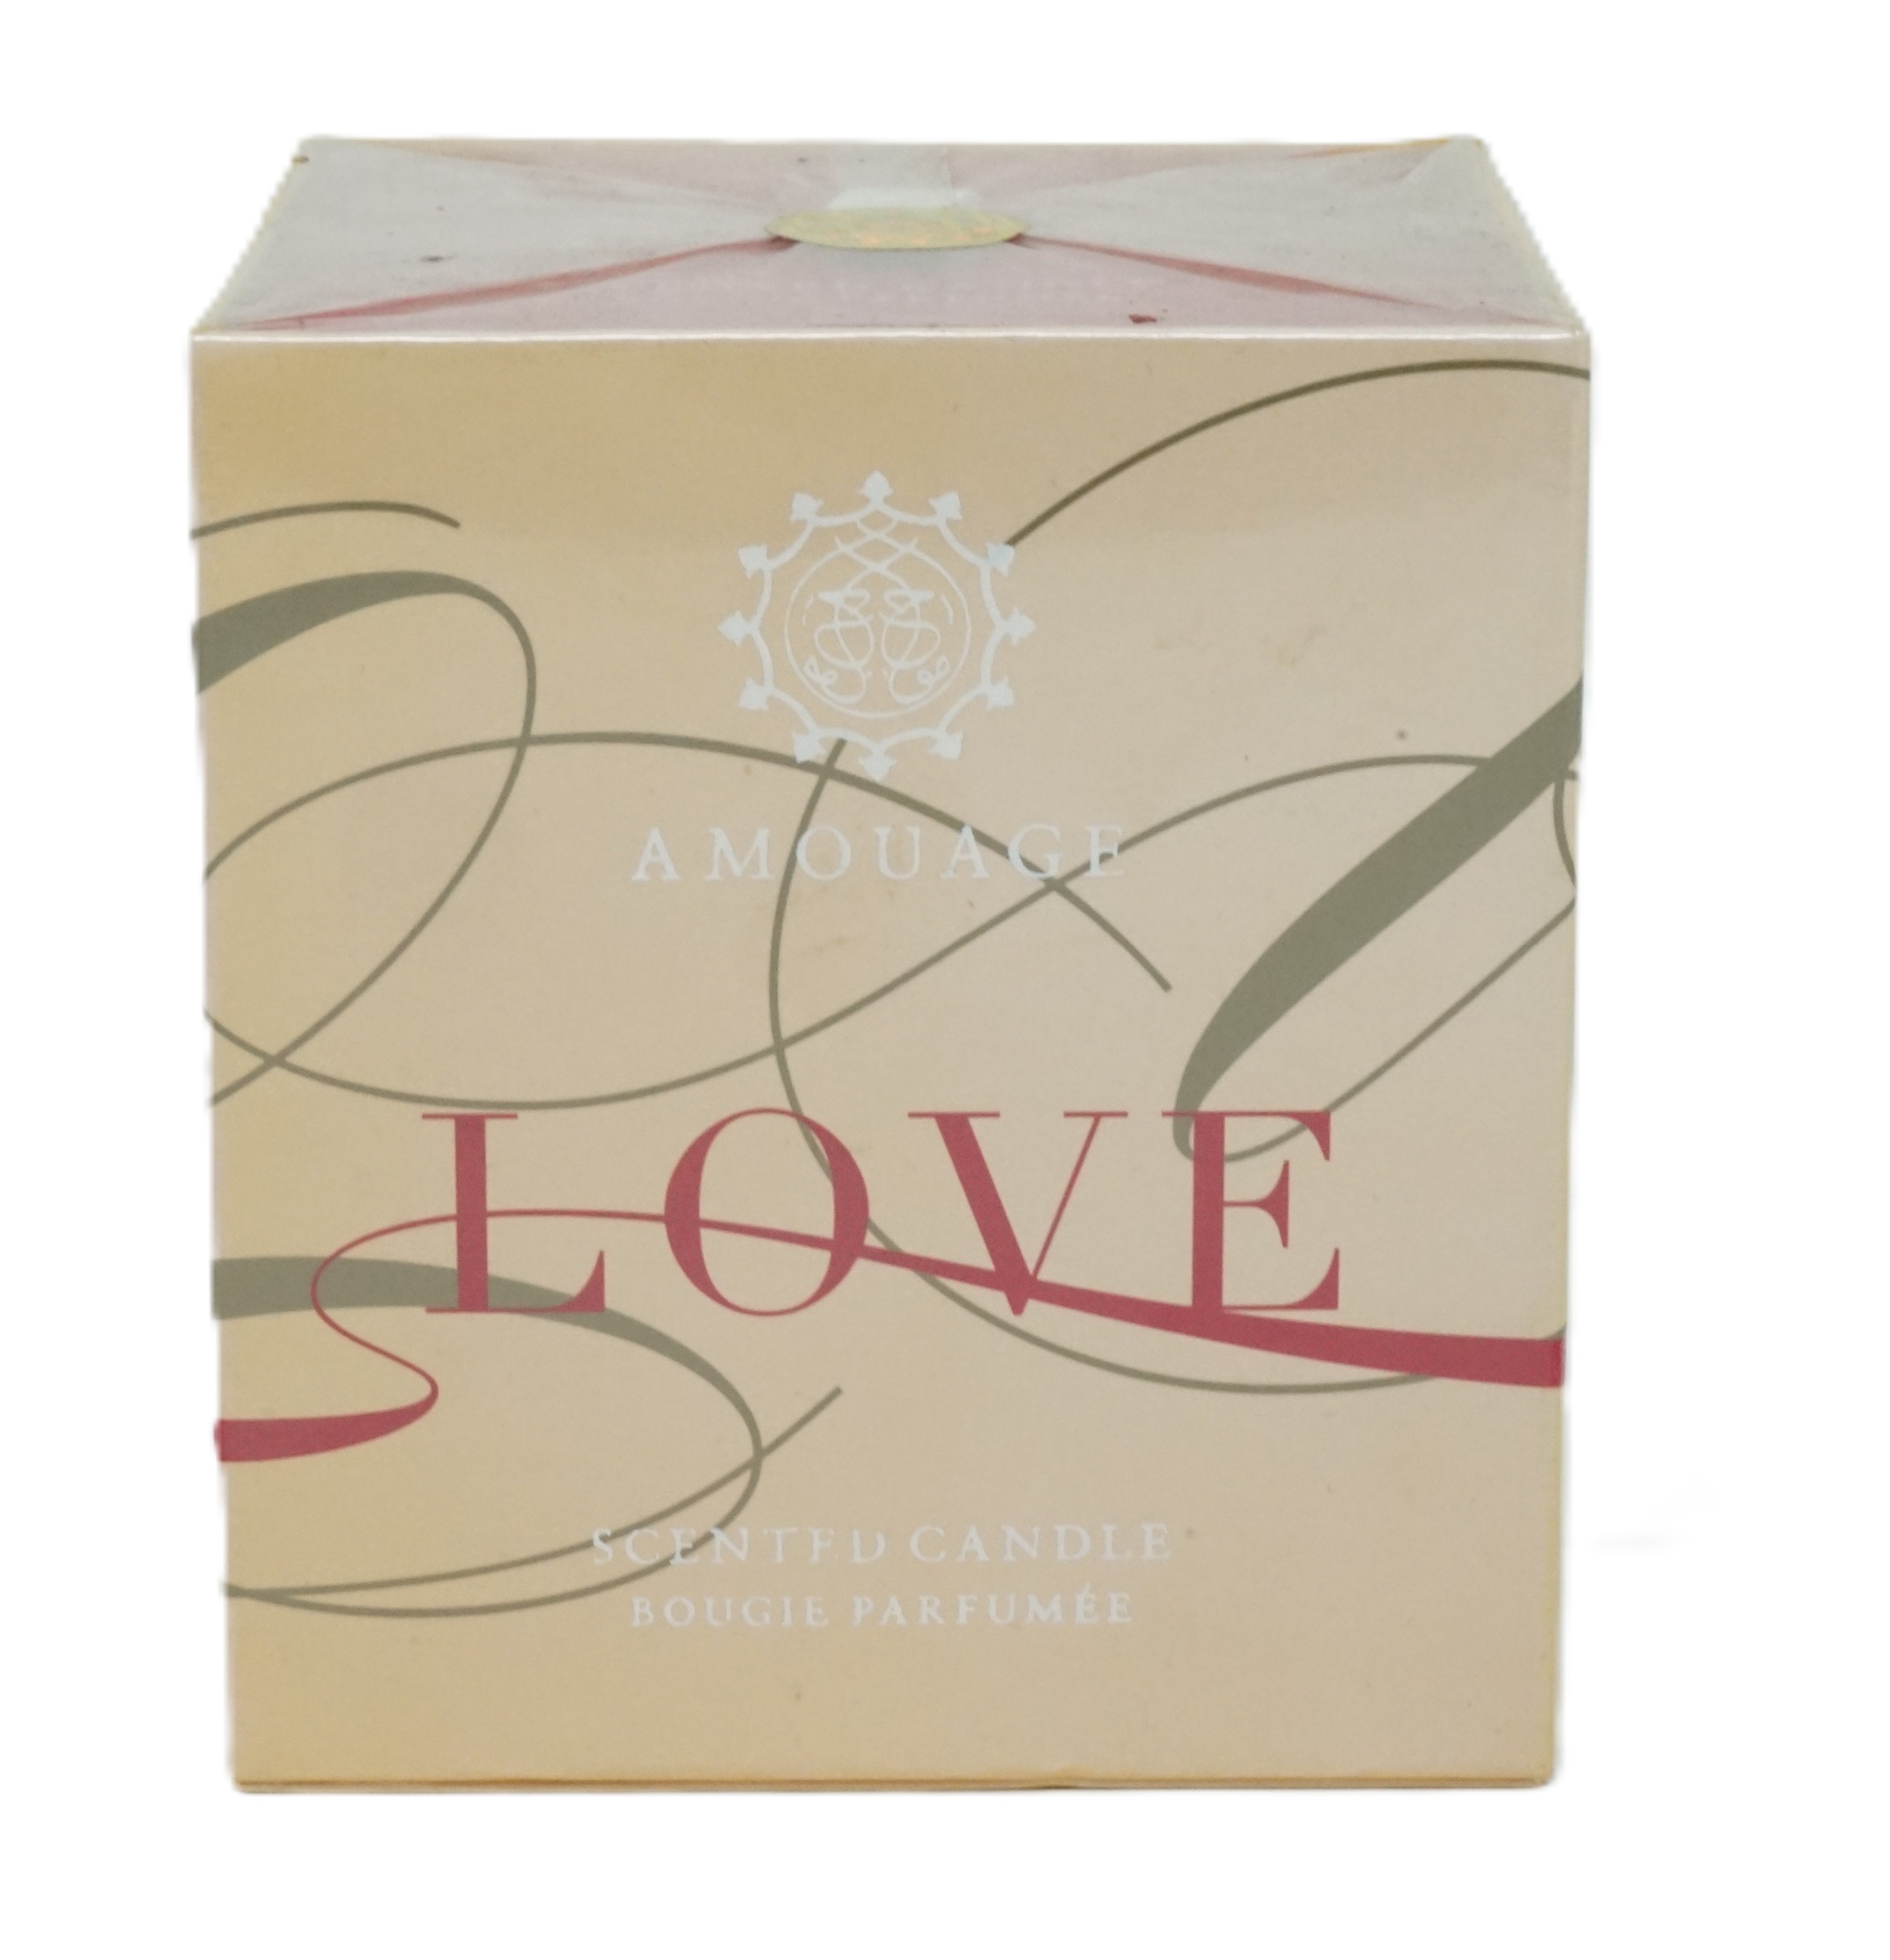 Amouage Love Scented Candle 195g